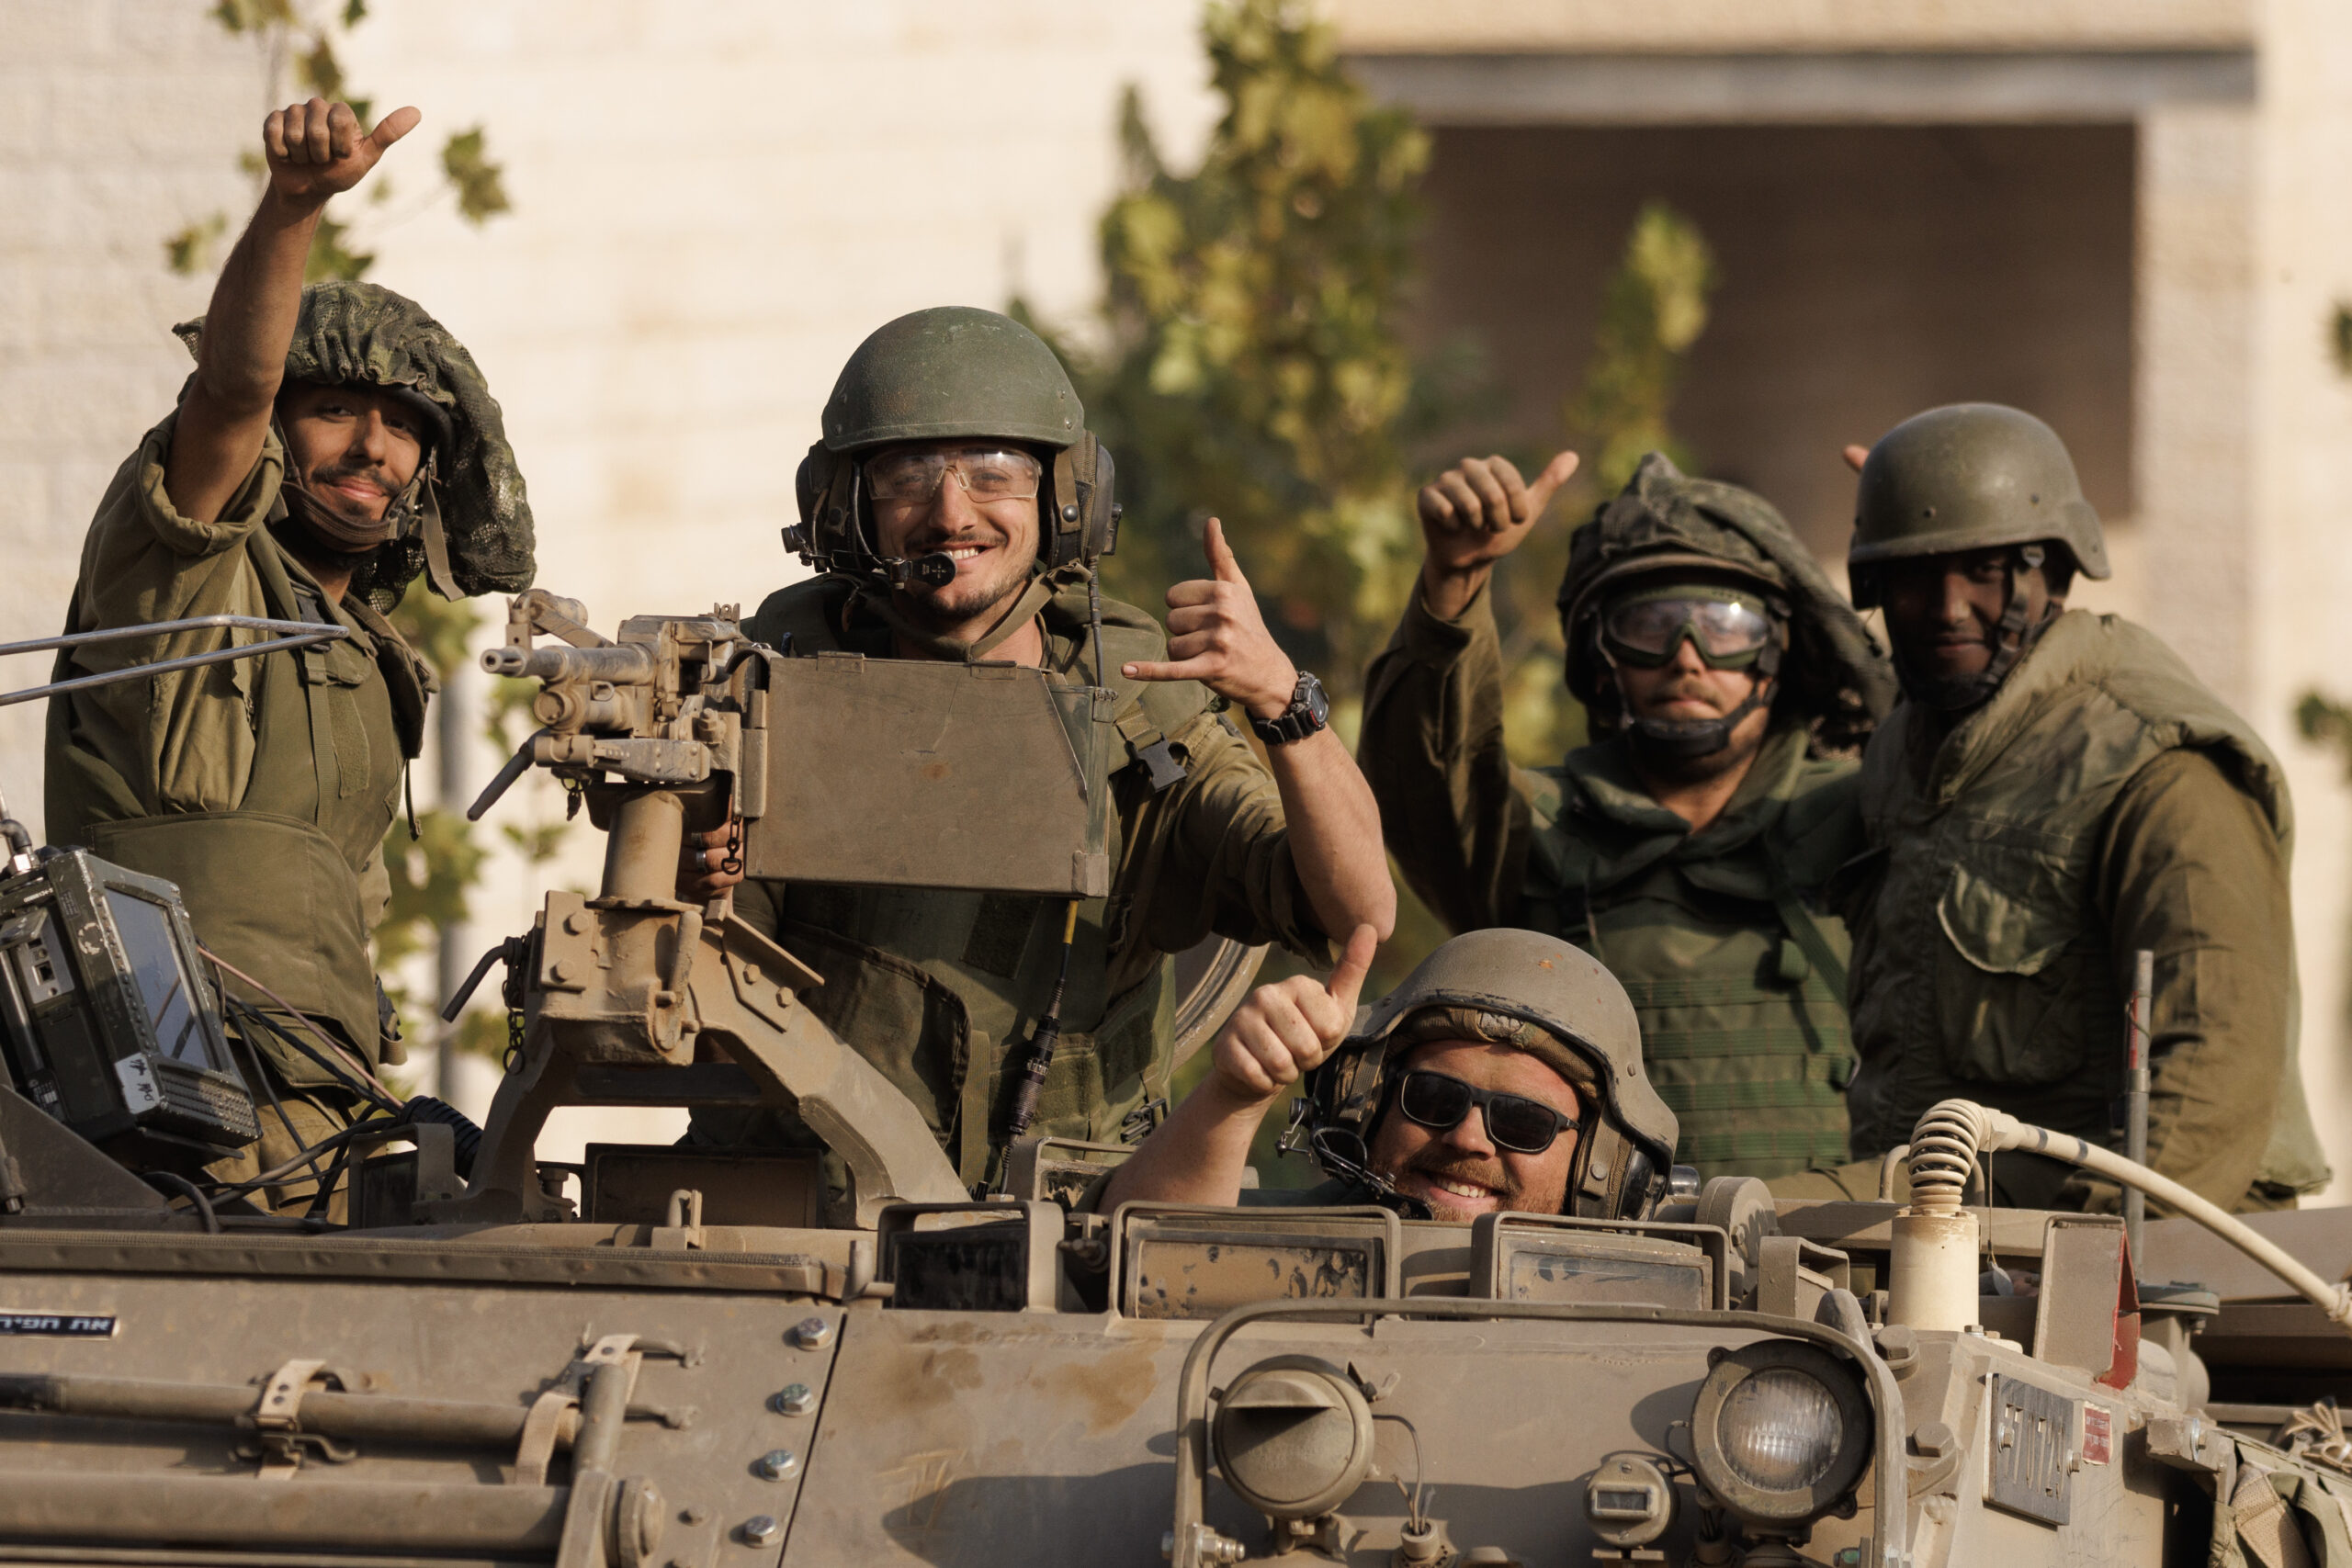 SDEROT, ISRAEL - OCTOBER 28: Israeli soldiers give a thumbs-up gesture as Israeli troops move near the border with Gaza on October 28, 2023 in Sderot, Israel. In the wake of the Oct. 7 attacks by Hamas that left 1,400 dead and 200 kidnapped, Israel launched a sustained bombardment of the Gaza Strip and threatened a ground invasion to vanquish the militant group that governs the Palestinian territory. But the fate of the hostages, Israelis and foreign nationals who are being held by Hamas in Gaza, as well as international pressure over the humanitarian situation in Gaza, have complicated Israel's military response to the attacks. A timeline for a proposed ground invasion remains unclear. (Photo by Dan Kitwood/Getty Images)